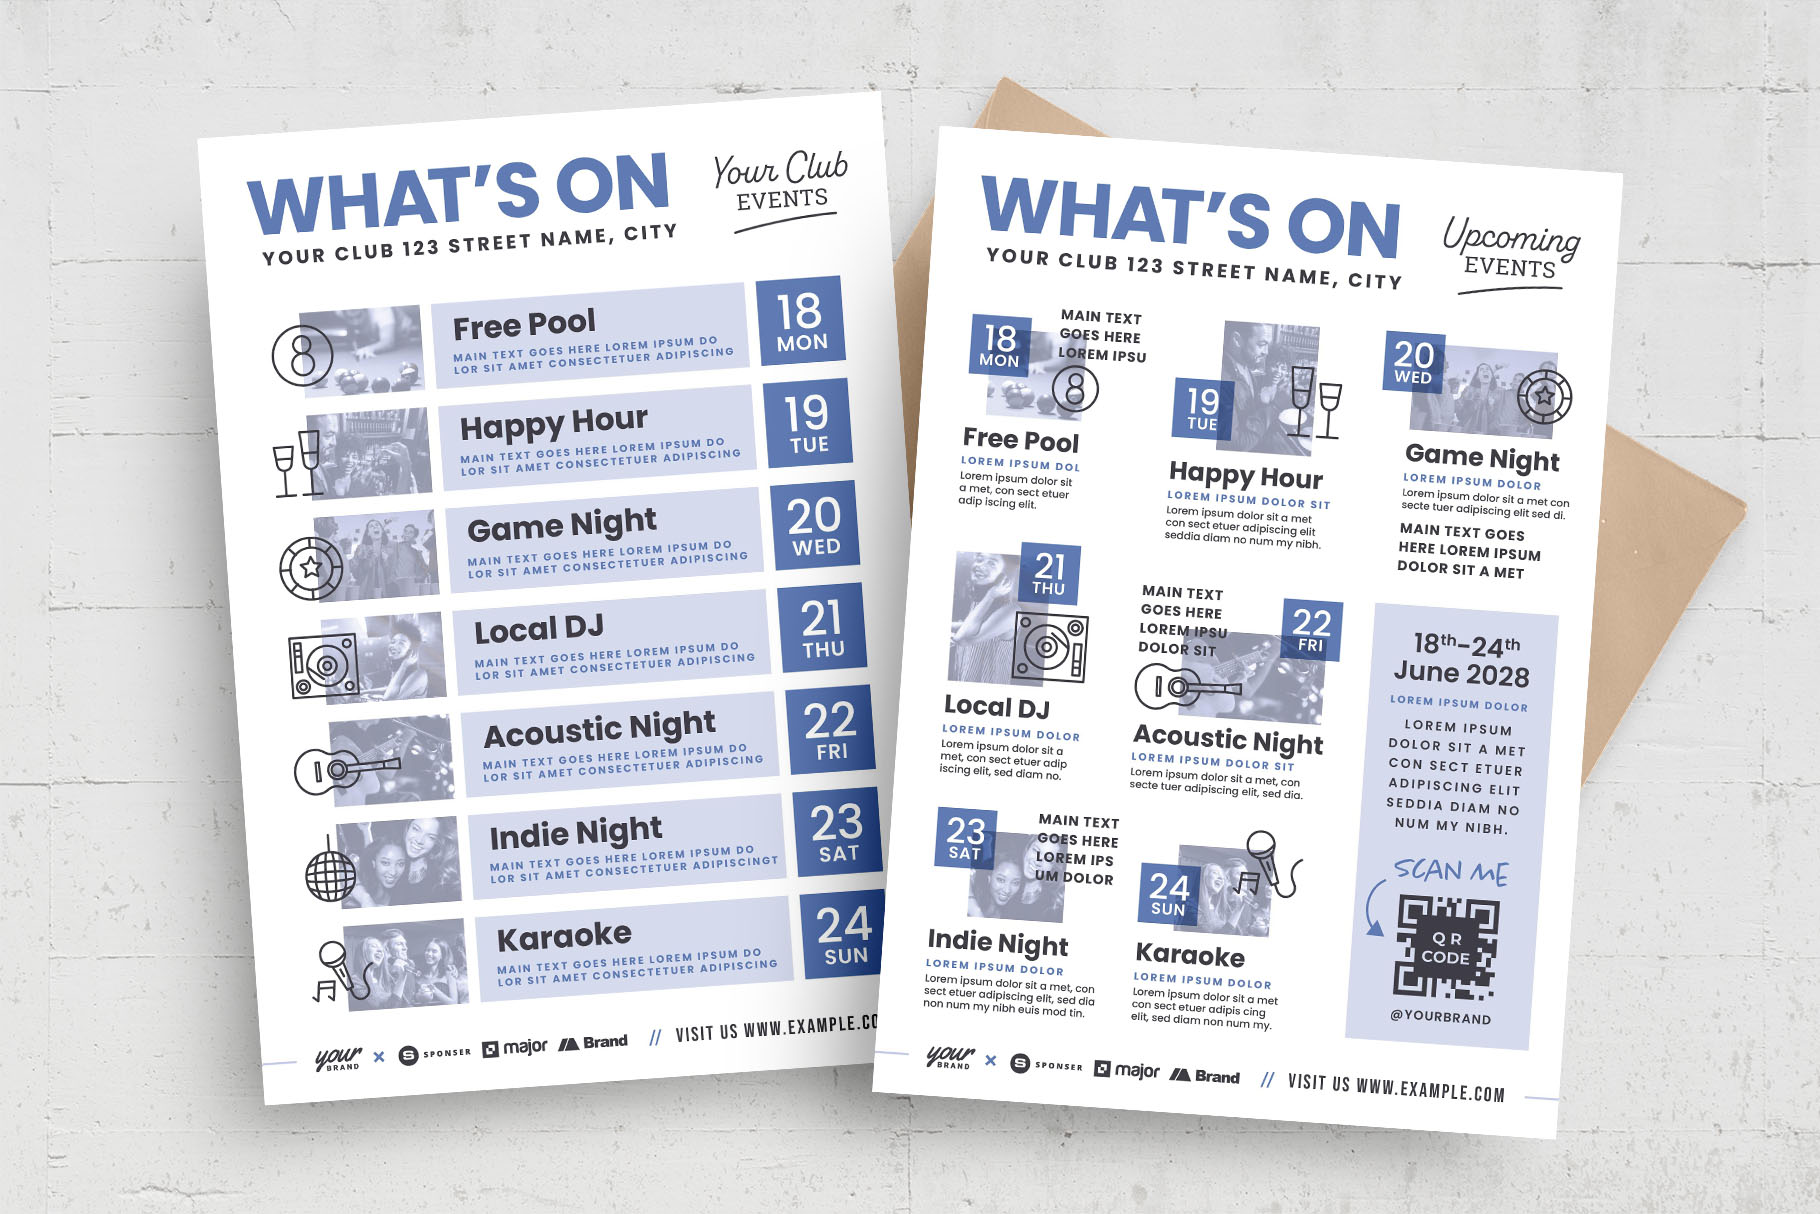 Weekly What's On Flyer Poster (PSD, AI, Vector Formats)